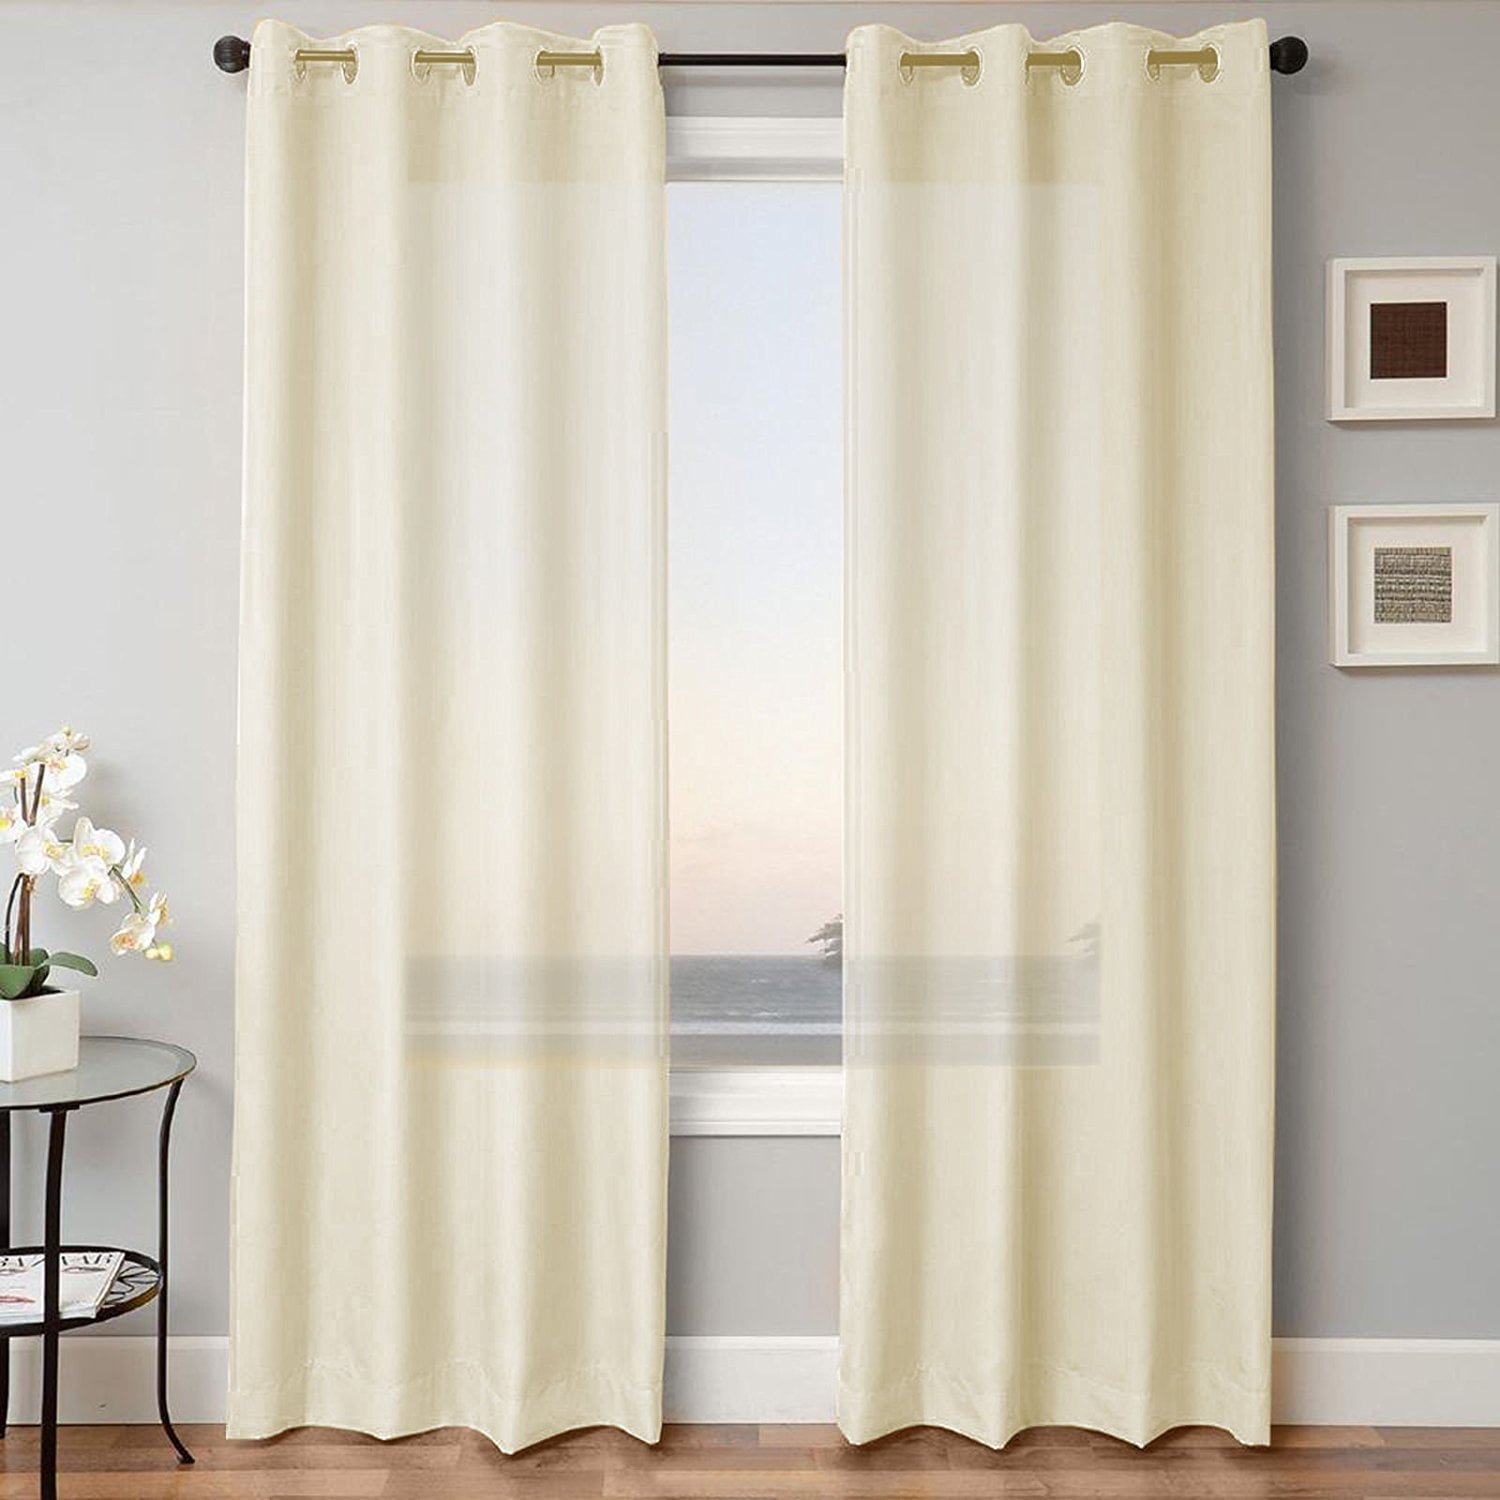 2 Pack Faux Silk Grommet Top Fully Stitched Window Curtains in 63" or 84" Length 